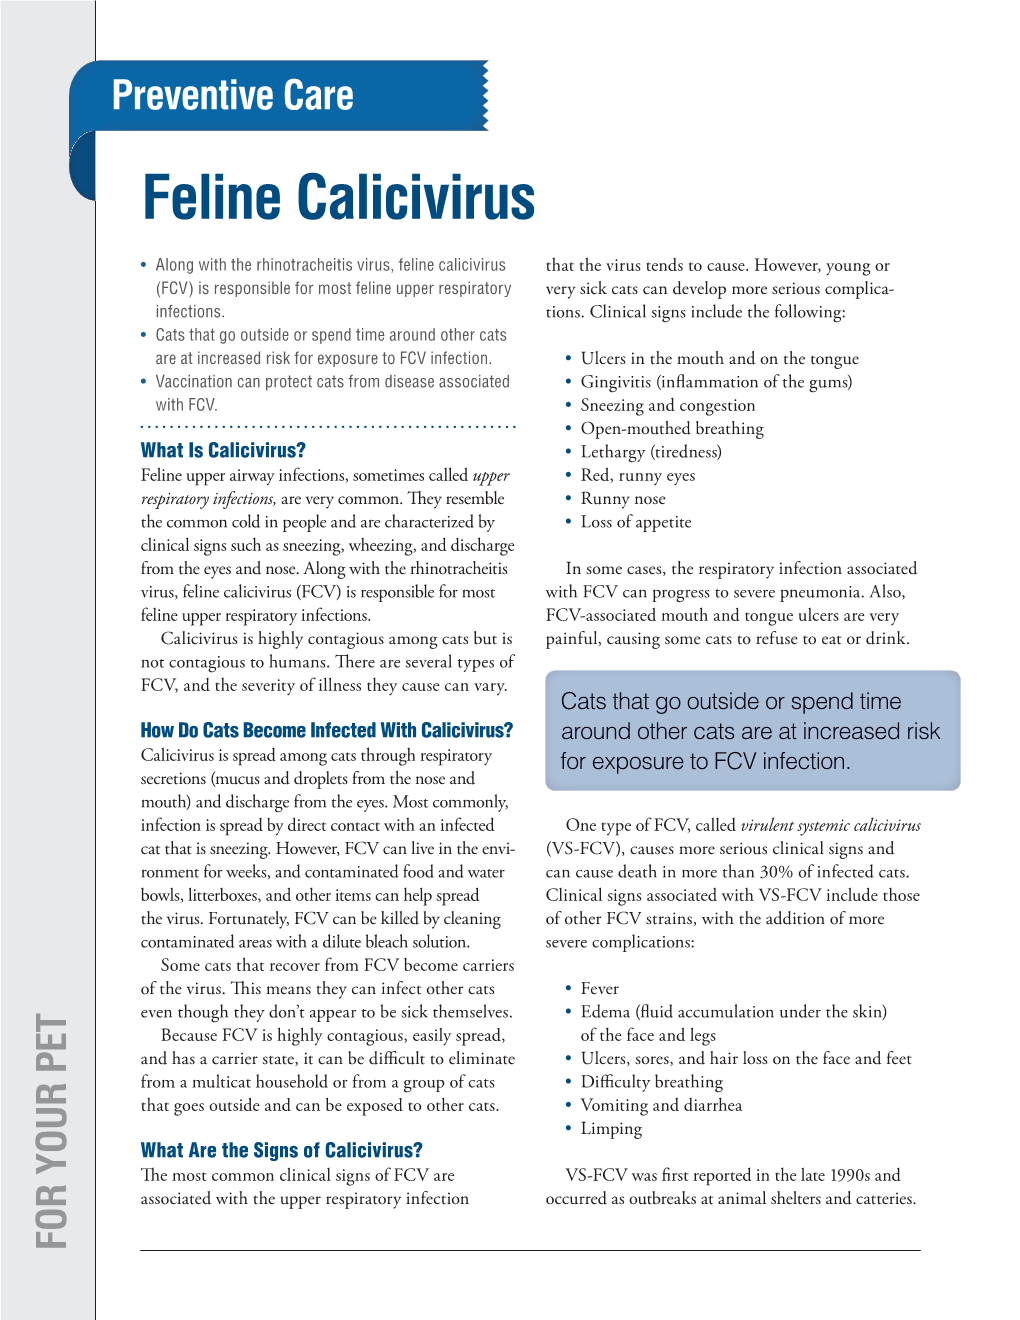 Feline Calicivirus (FCV) Is Responsible for Most from the Eyes and Nose